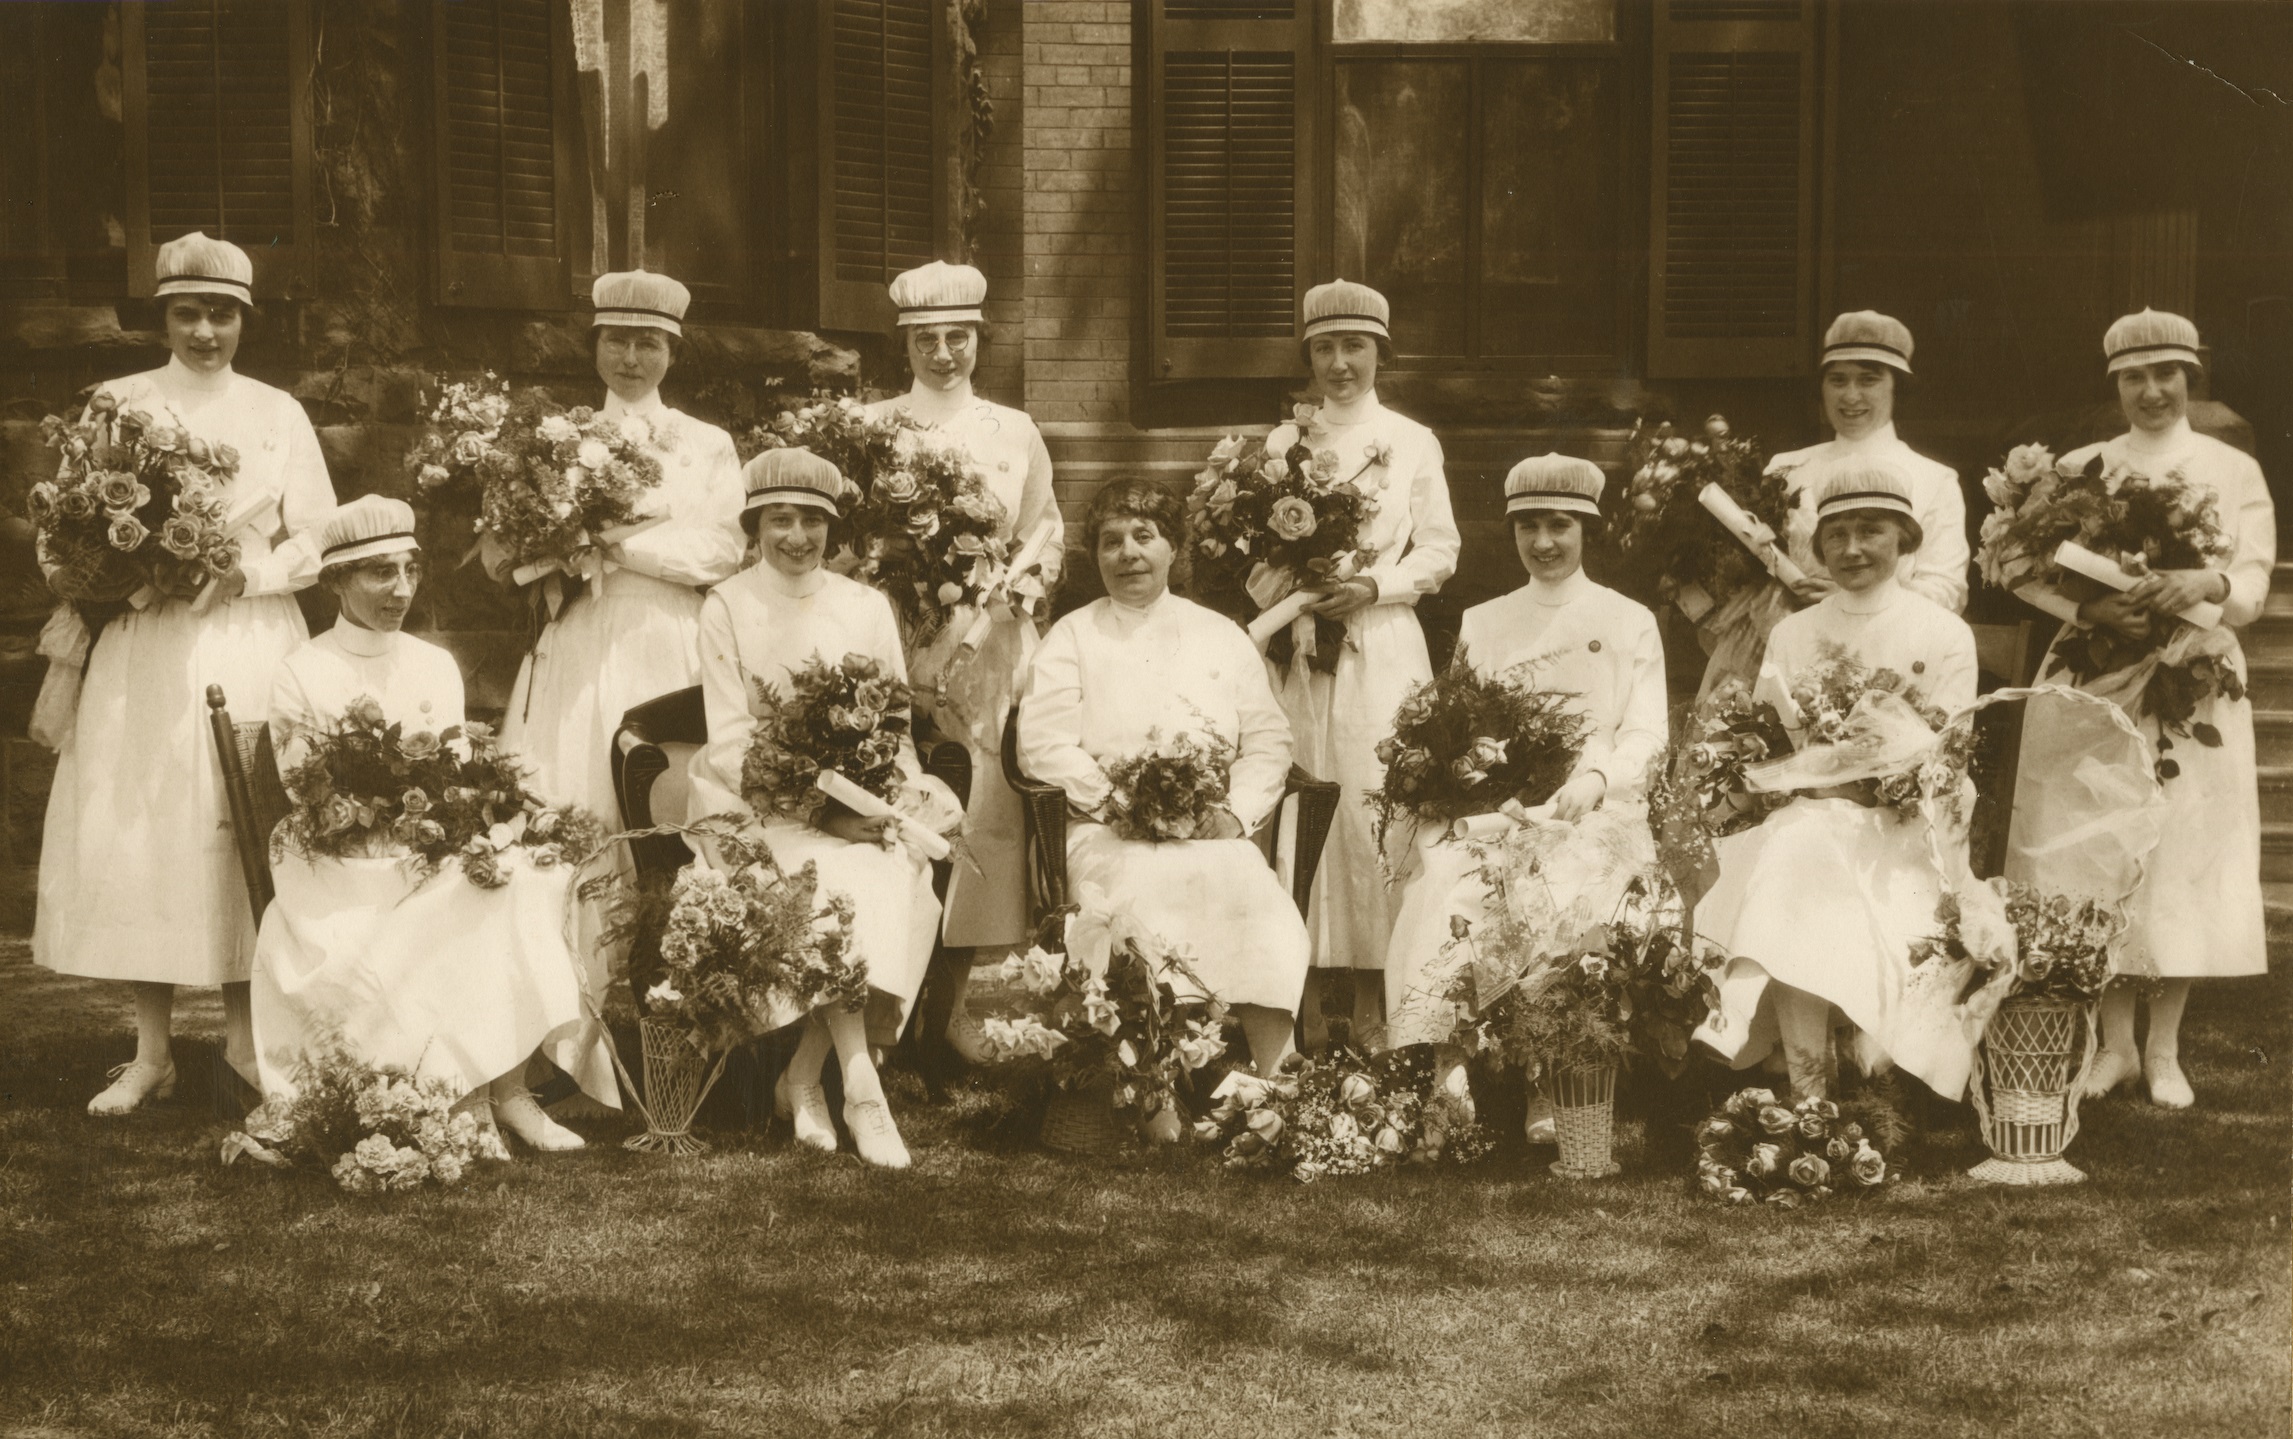 Eleven smiling women pose formally with flower arrangements. All but one are wearing nurses' caps.